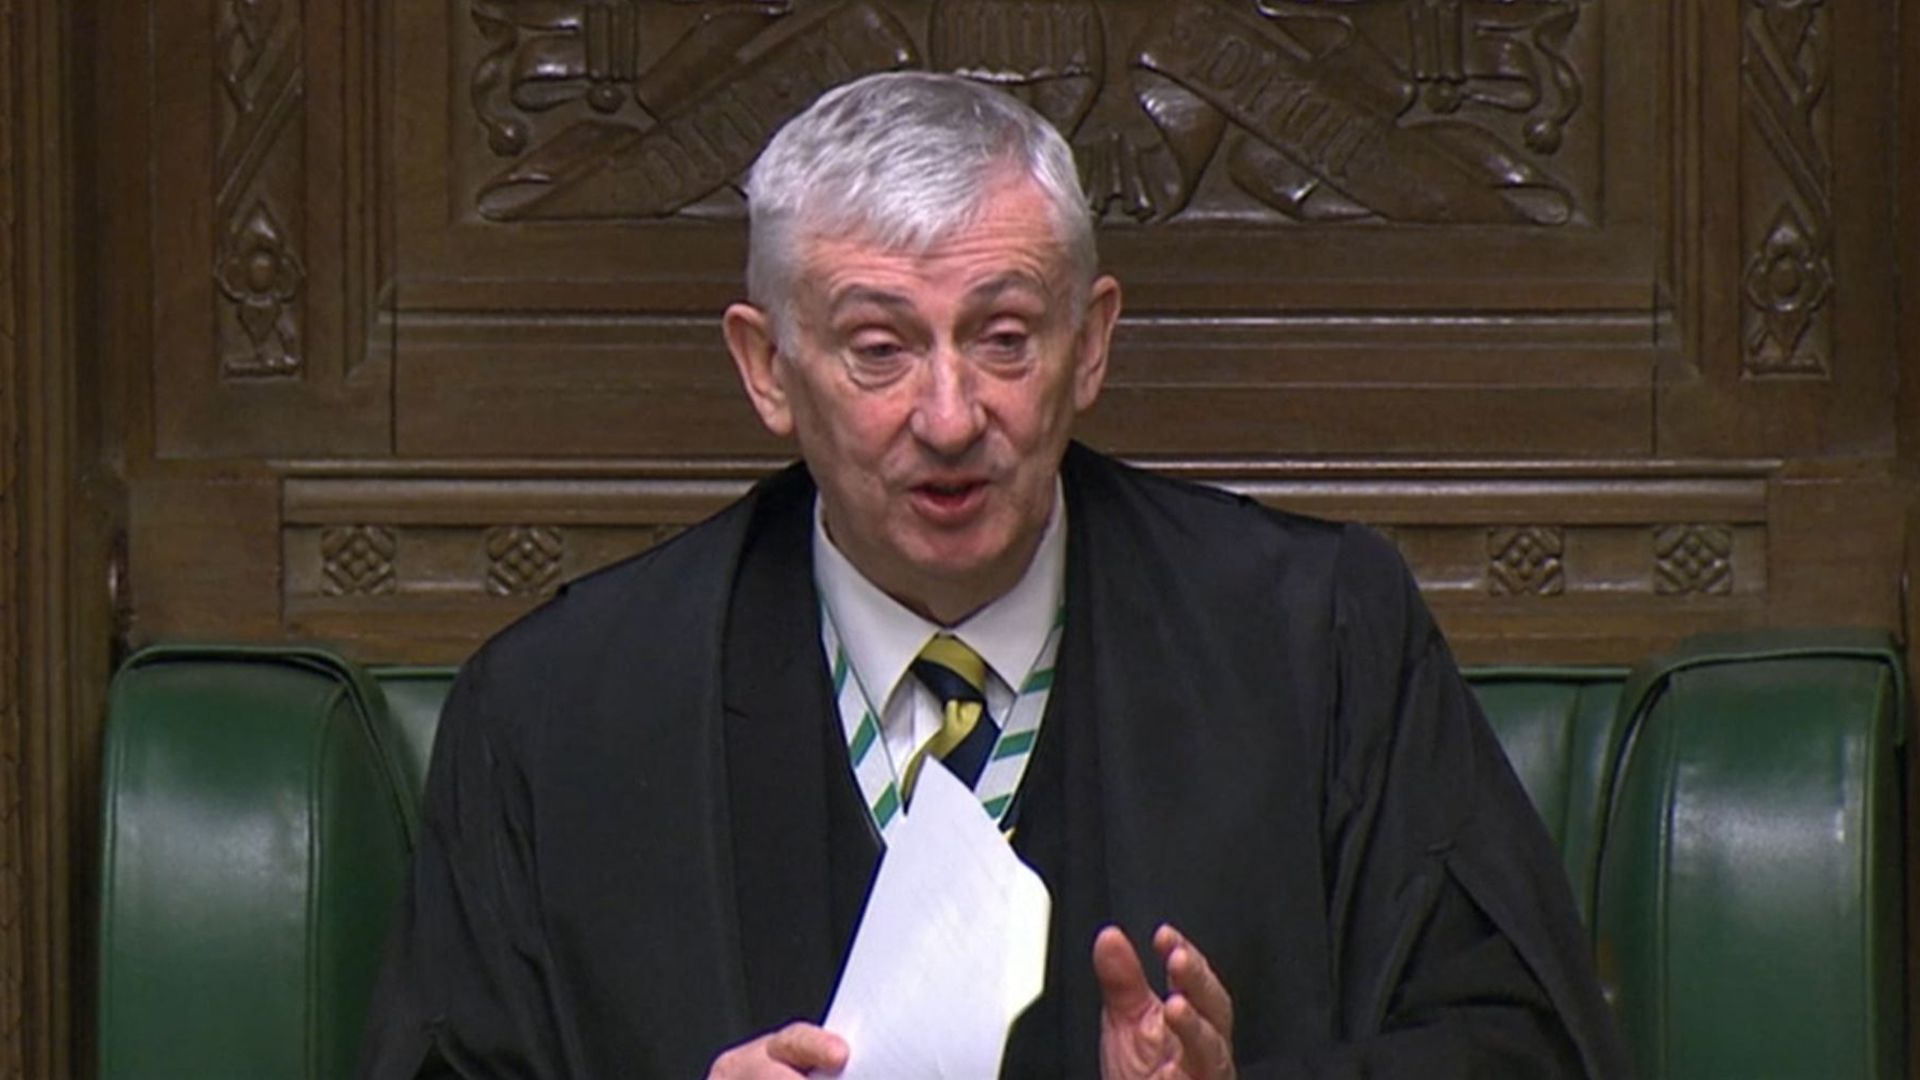 Speaker of the House of Commons Sir Lindsay Hoyle during the debate in the House of Commons - Credit: PA